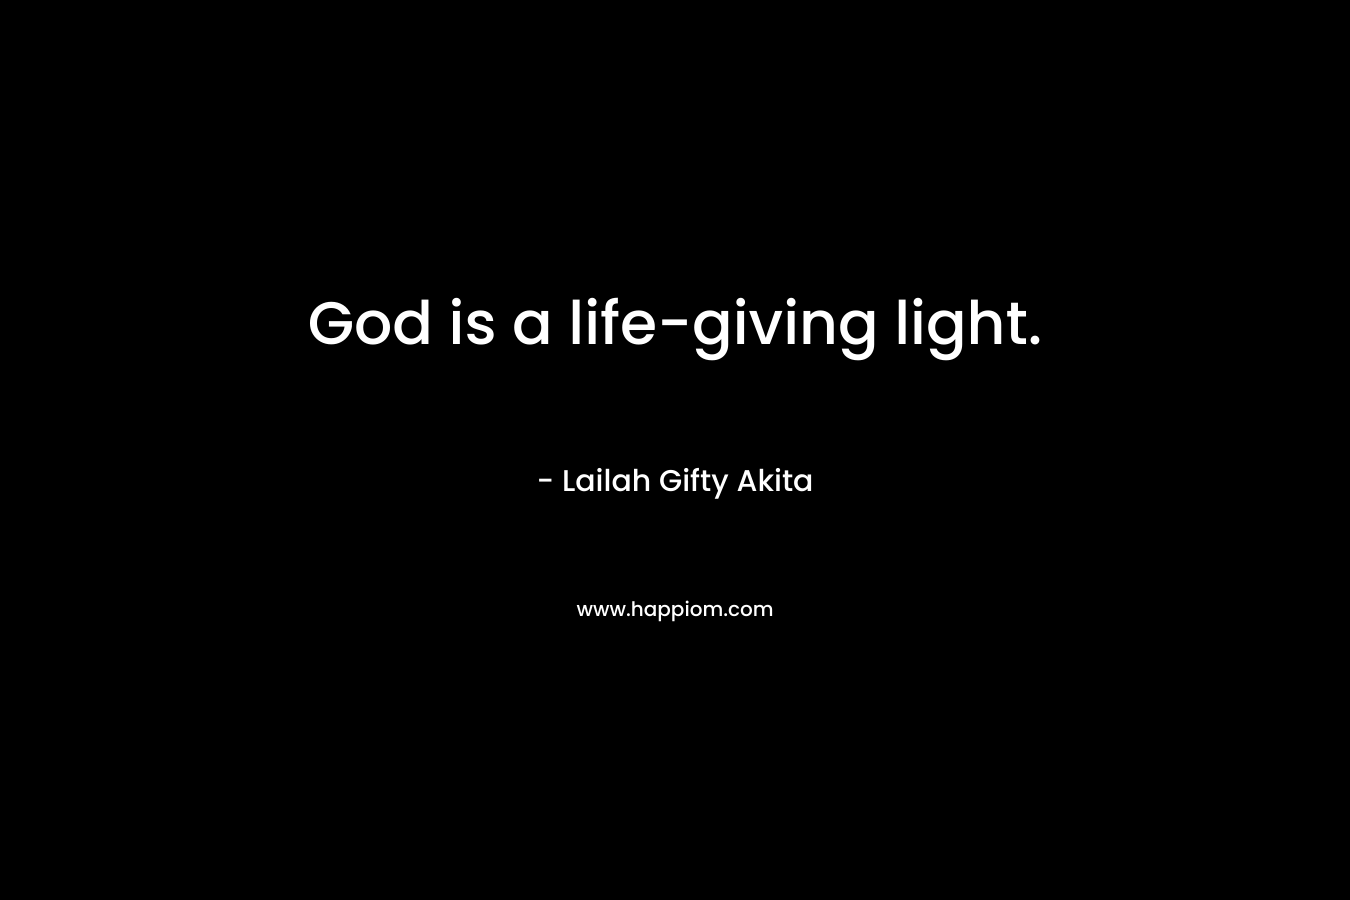 God is a life-giving light.